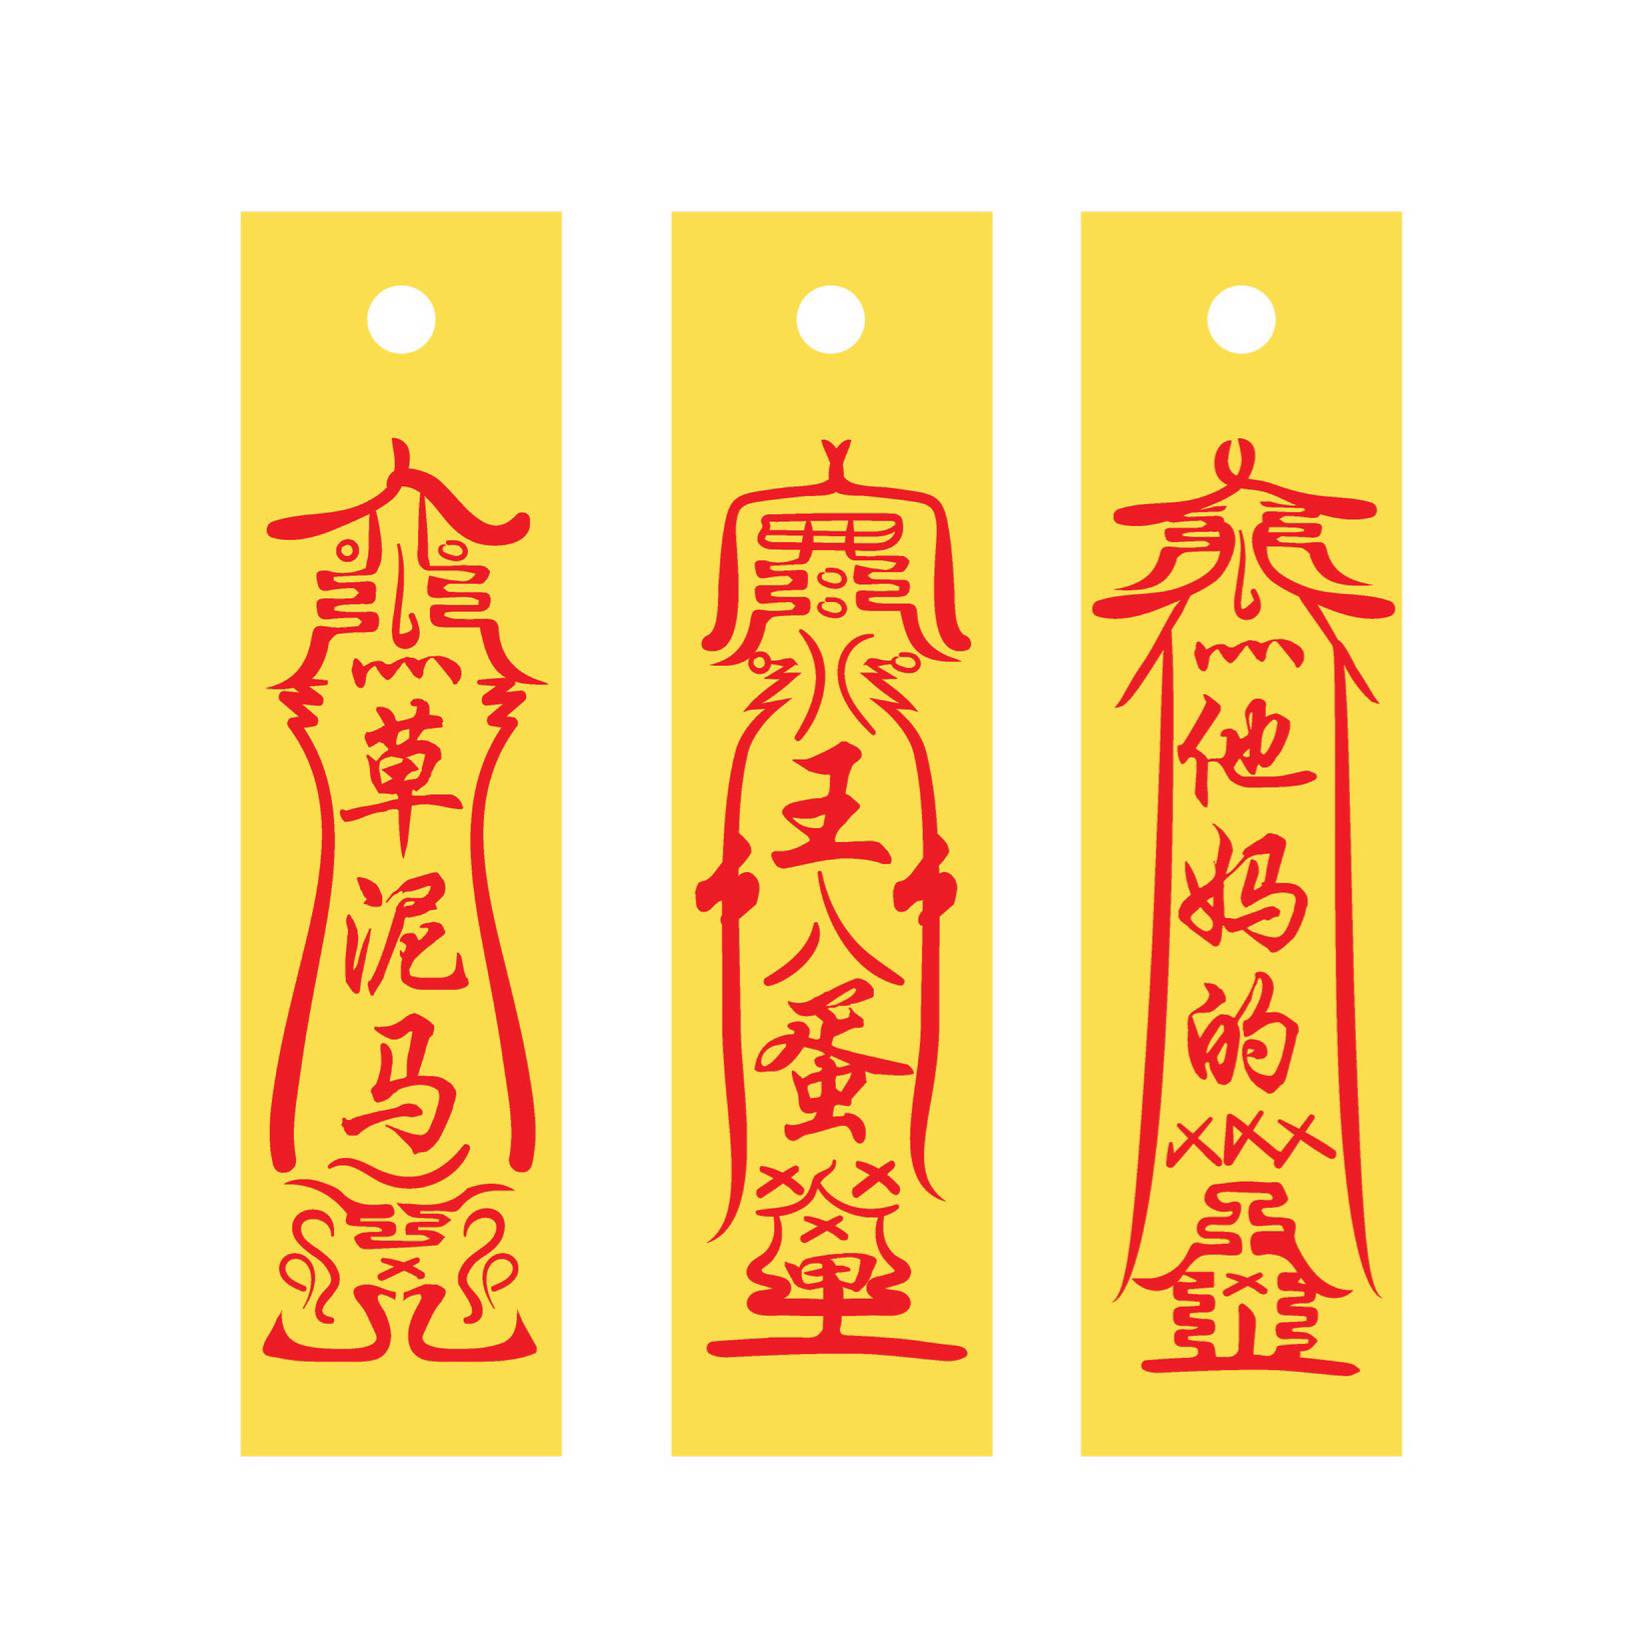 Luggage tags that look like Chinese zombie talismans will be available ...